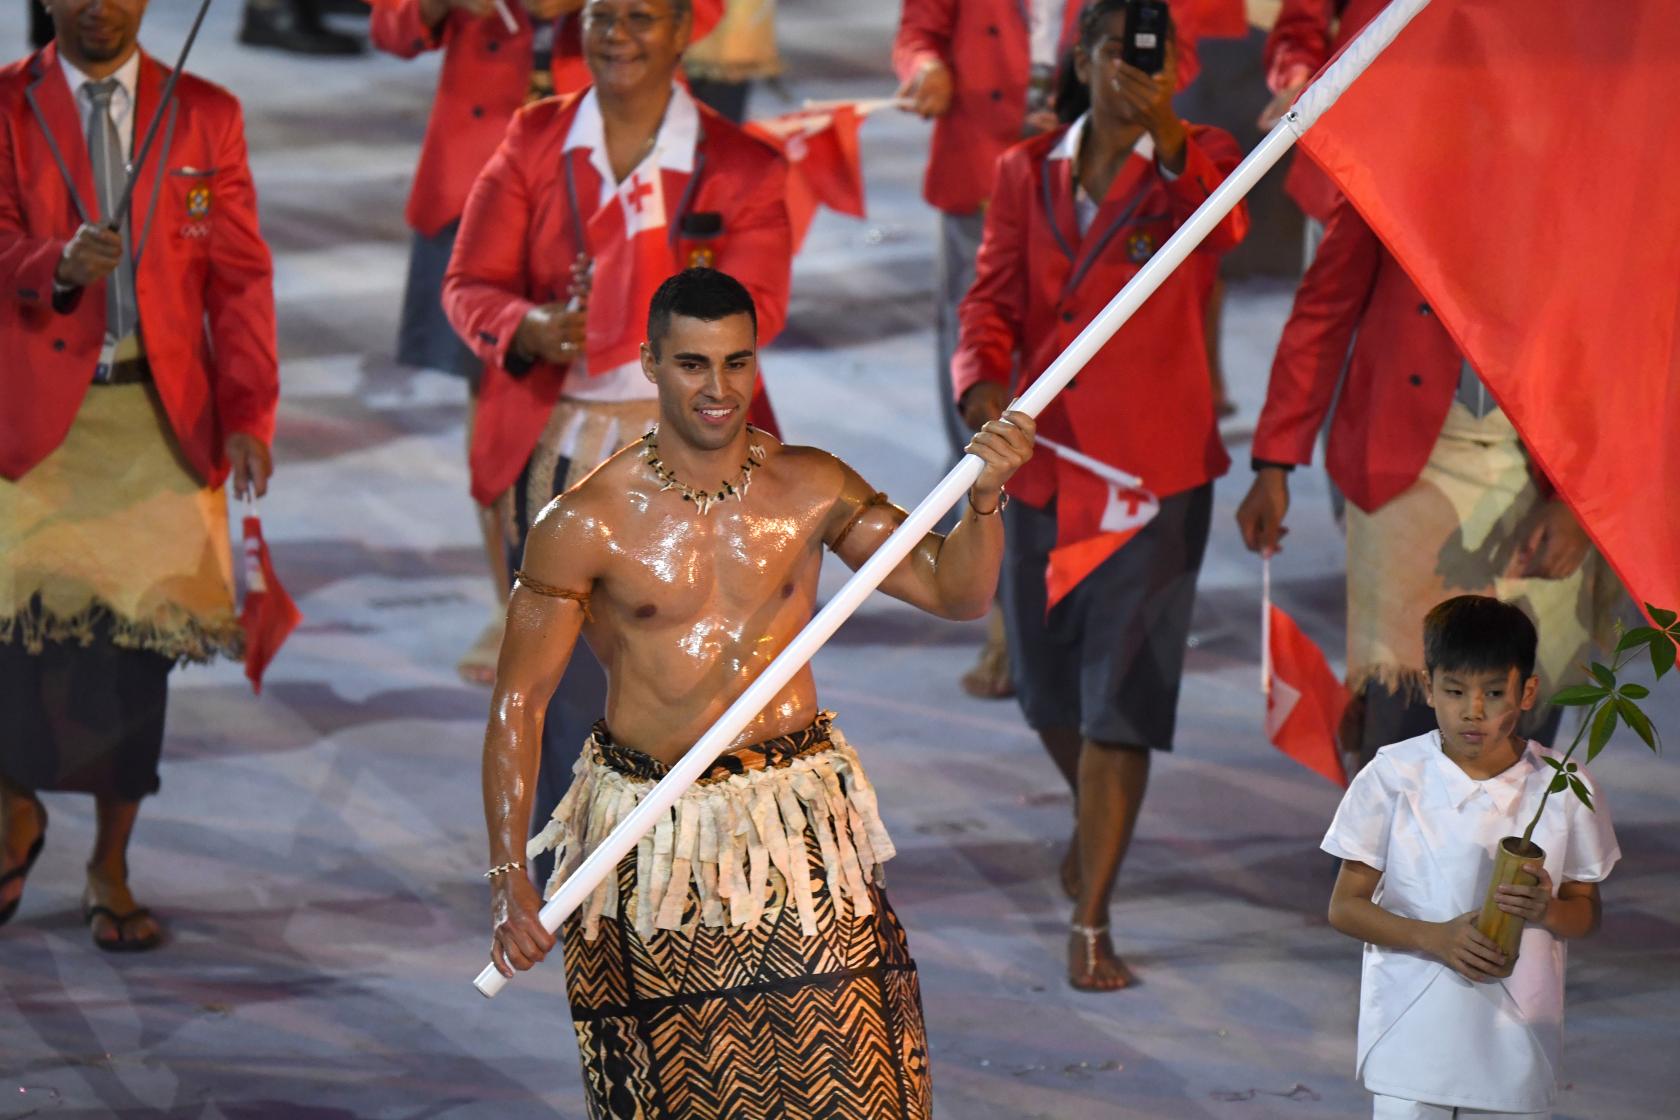 Tonga's flagbearer Pita Nikolas Taufatofua leads his delegation during the opening ceremony of the Rio 2016 Olympic Games at the Maracana stadium in Rio de Janeiro on August 5, 2016. / AFP / OLIVIER MORIN (Photo credit should read OLIVIER MORIN/AFP/Getty Images)